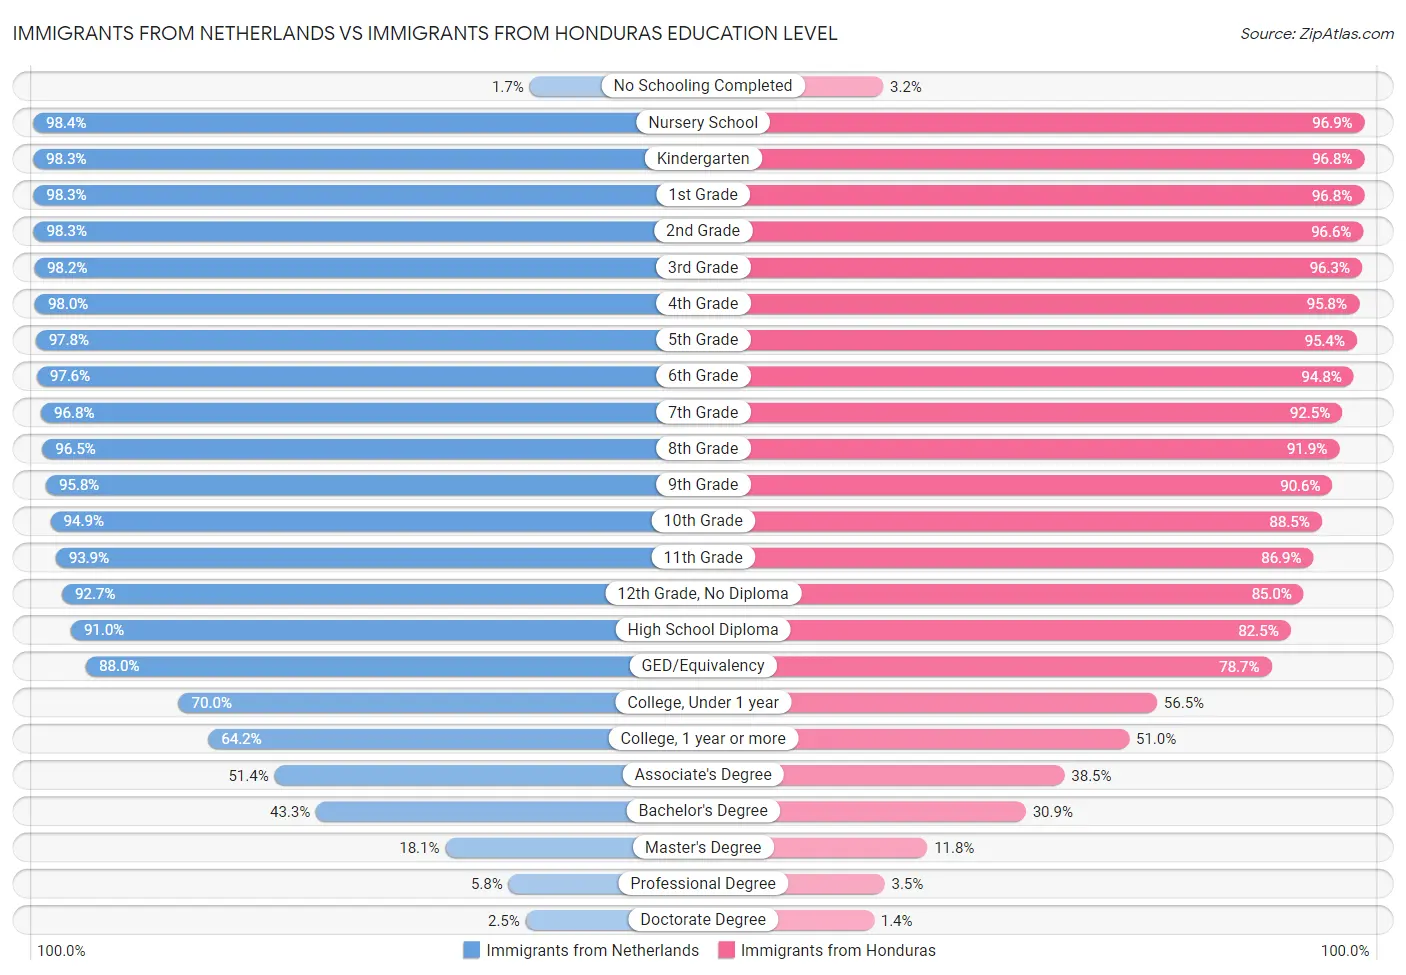 Immigrants from Netherlands vs Immigrants from Honduras Education Level